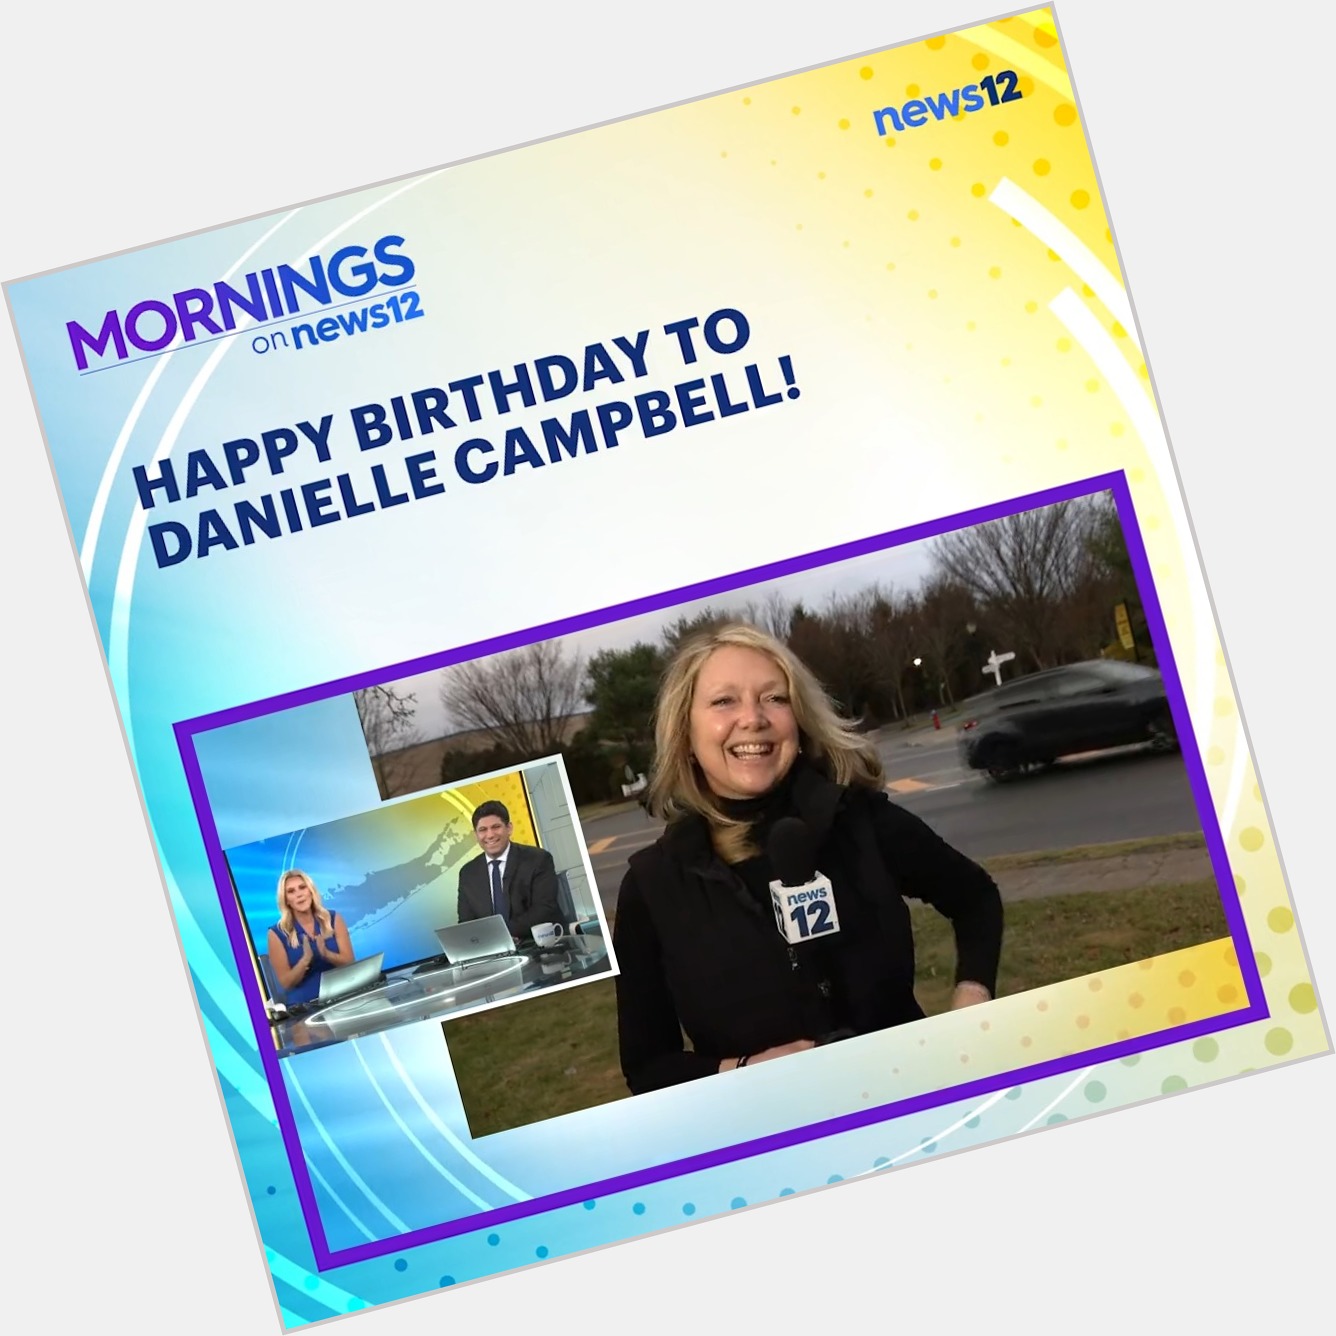 SURPRISE! Happy Birthday to our reporter Danielle Campbell! 